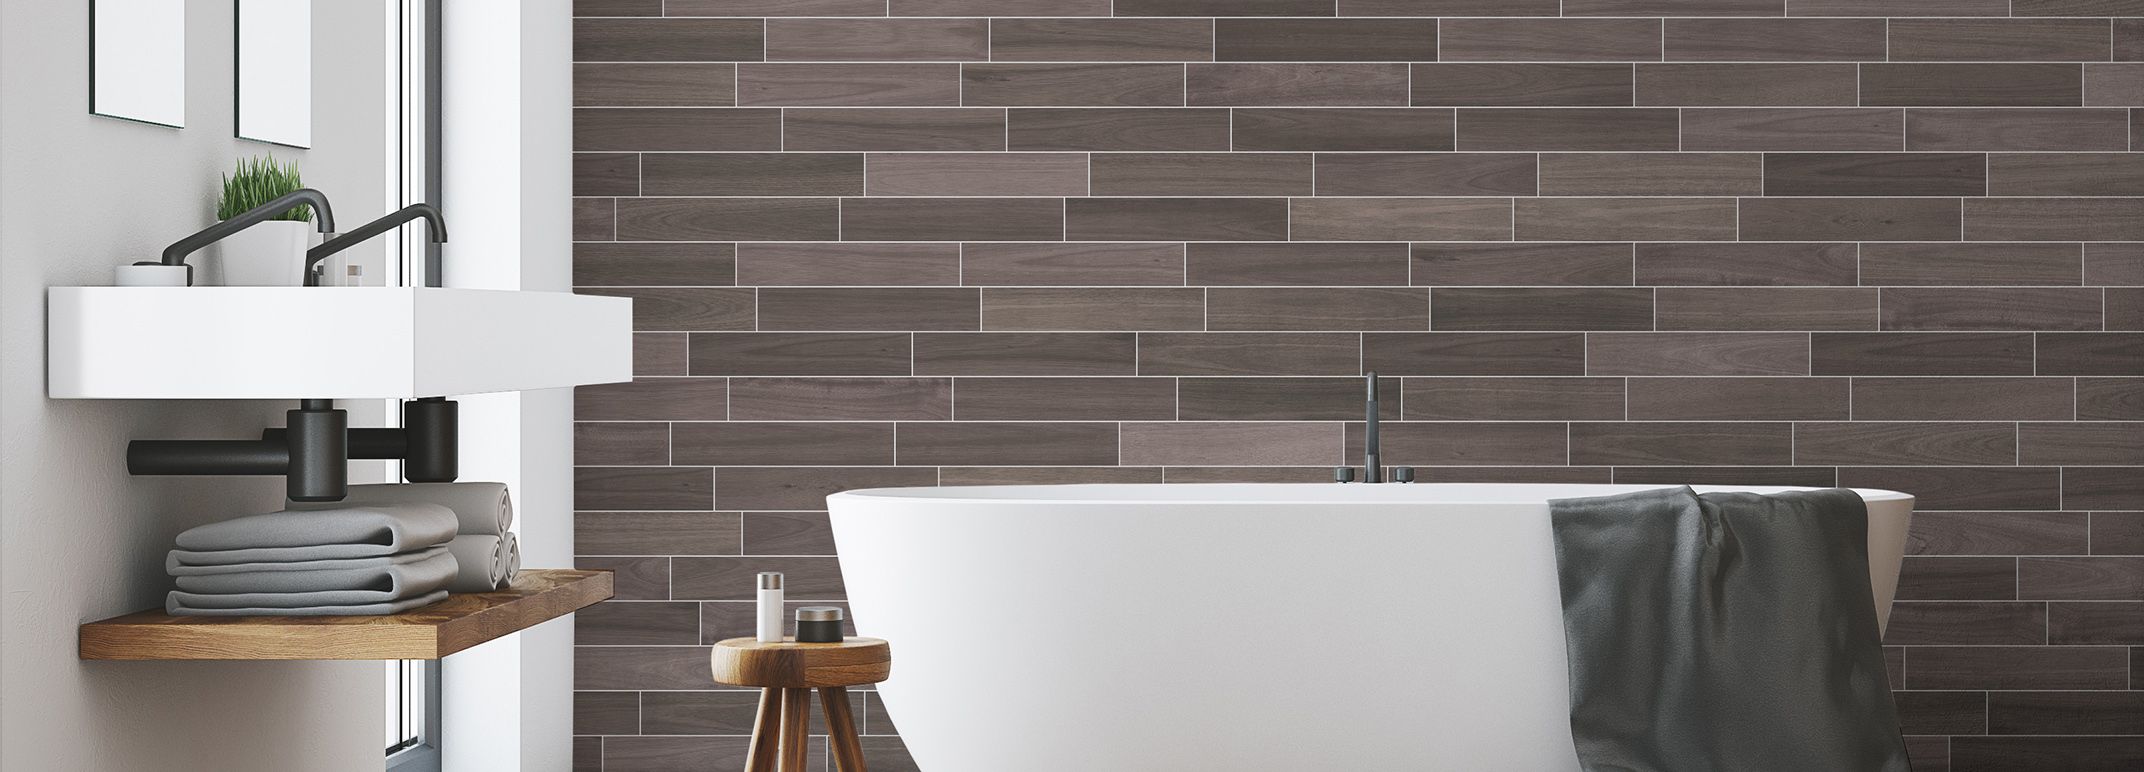 World Tiles - Products - Stanza Chocolate